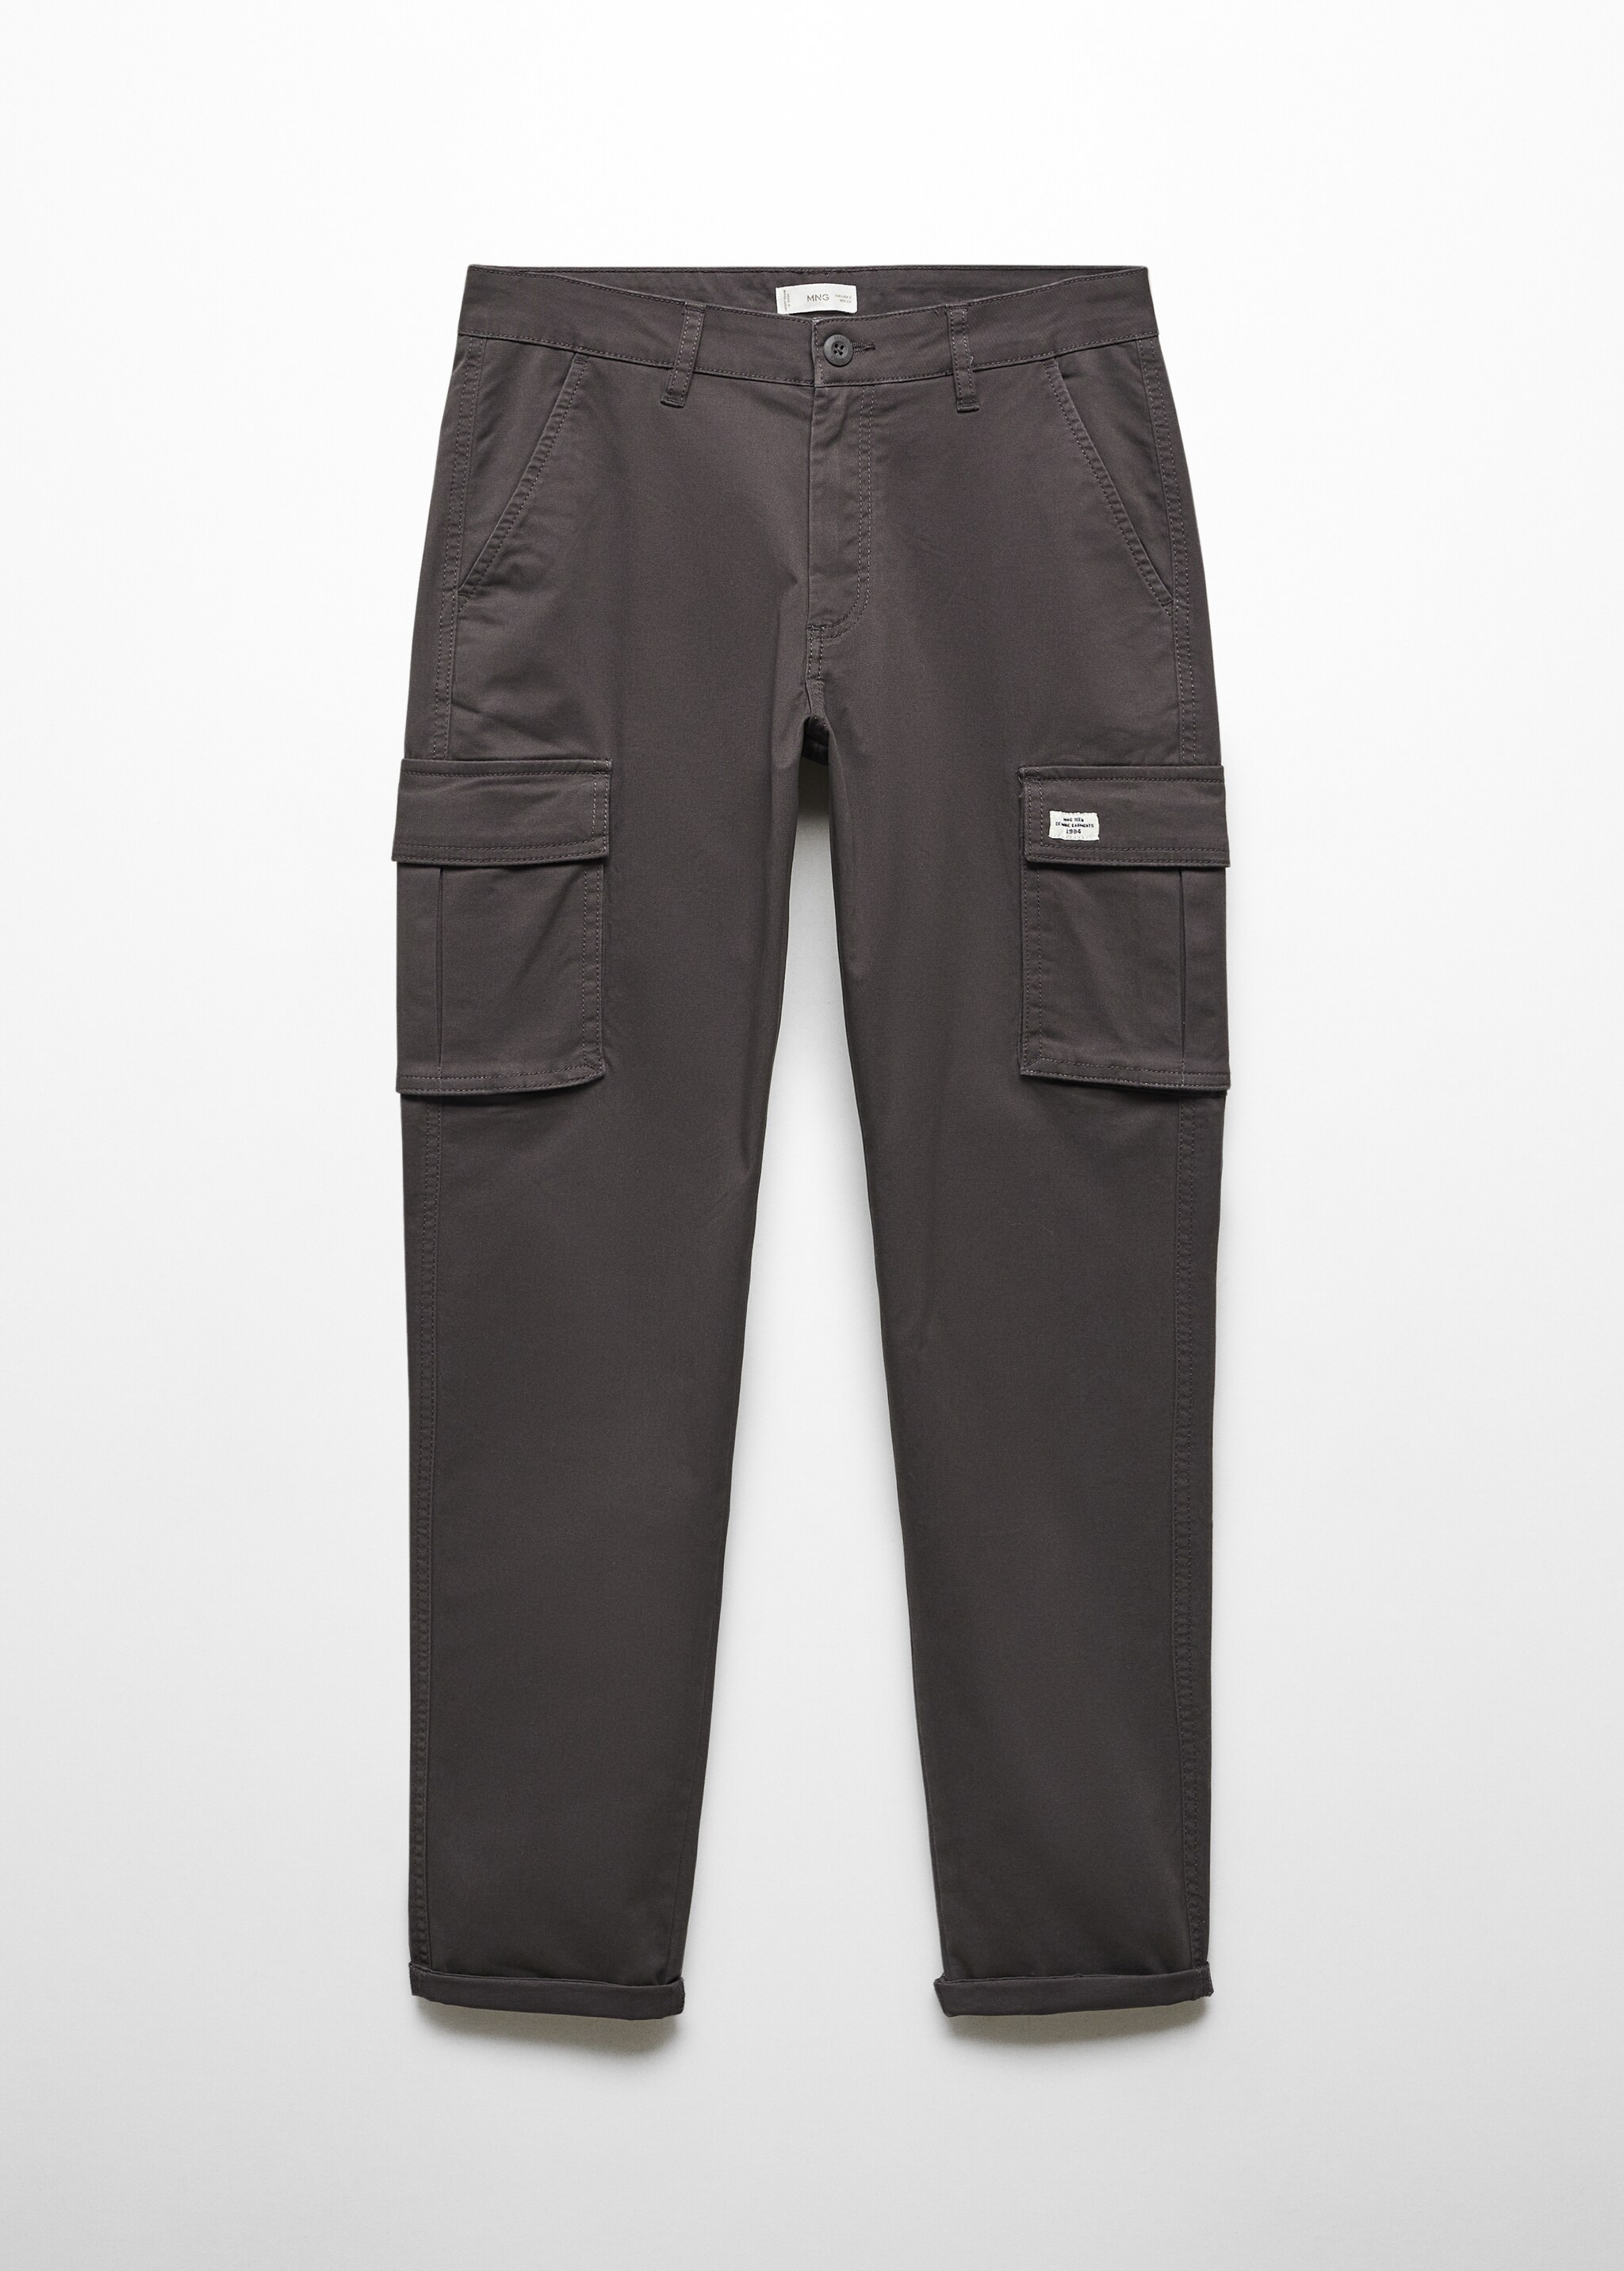 Cotton cargo trousers - Article without model